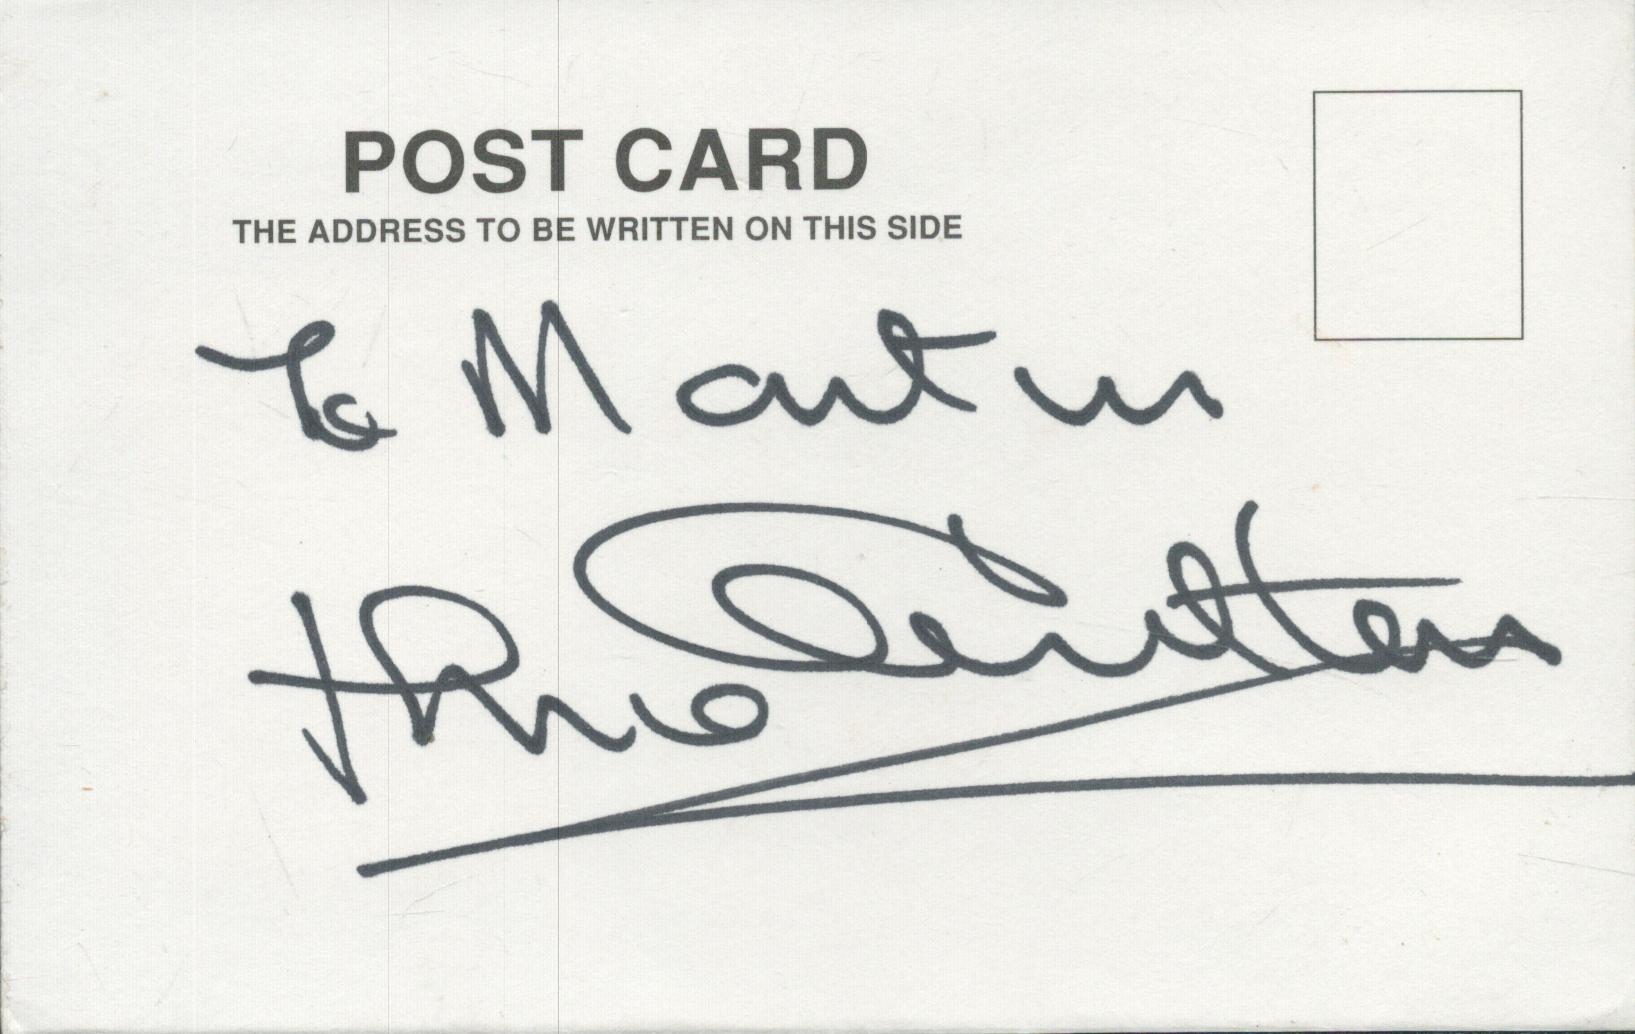 Jack Charlton signed 6x4 inch white card. Good condition. All autographs are genuine hand signed and